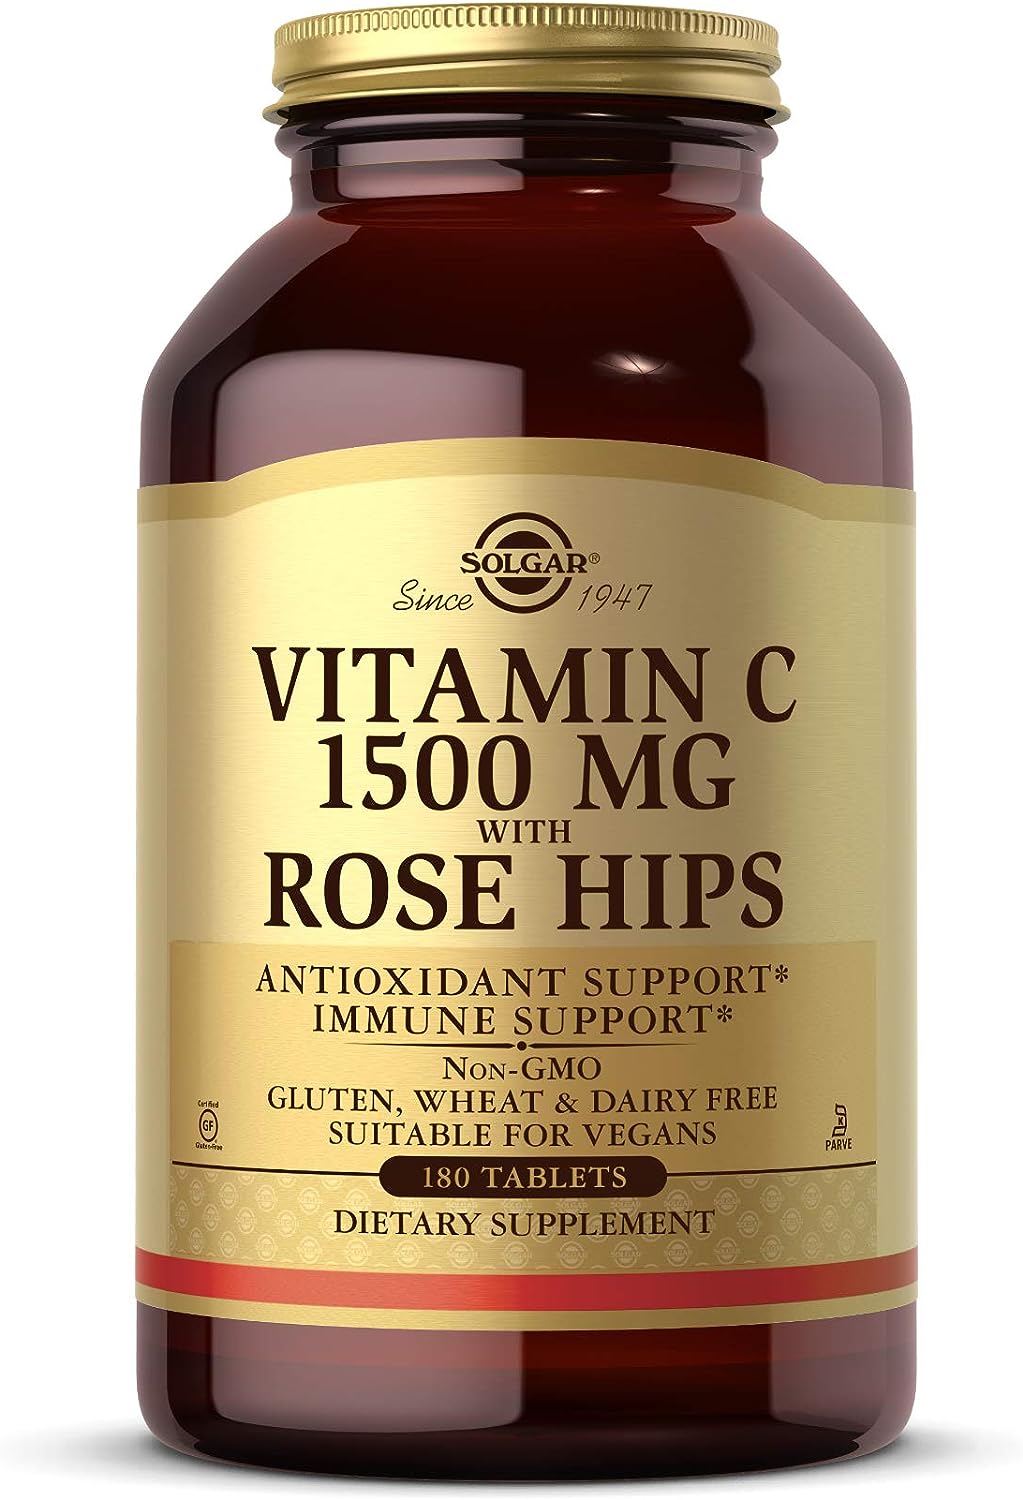 Solgar Vitamin C 1500 mg with Rose Hips, 180 Tablets - Antioxidant & Immune Support - Overall Health - Supports Healthy Skin & Joints - Non GMO, Vegan Gluten Free, Dairy Free, Kosher - 180 Servings